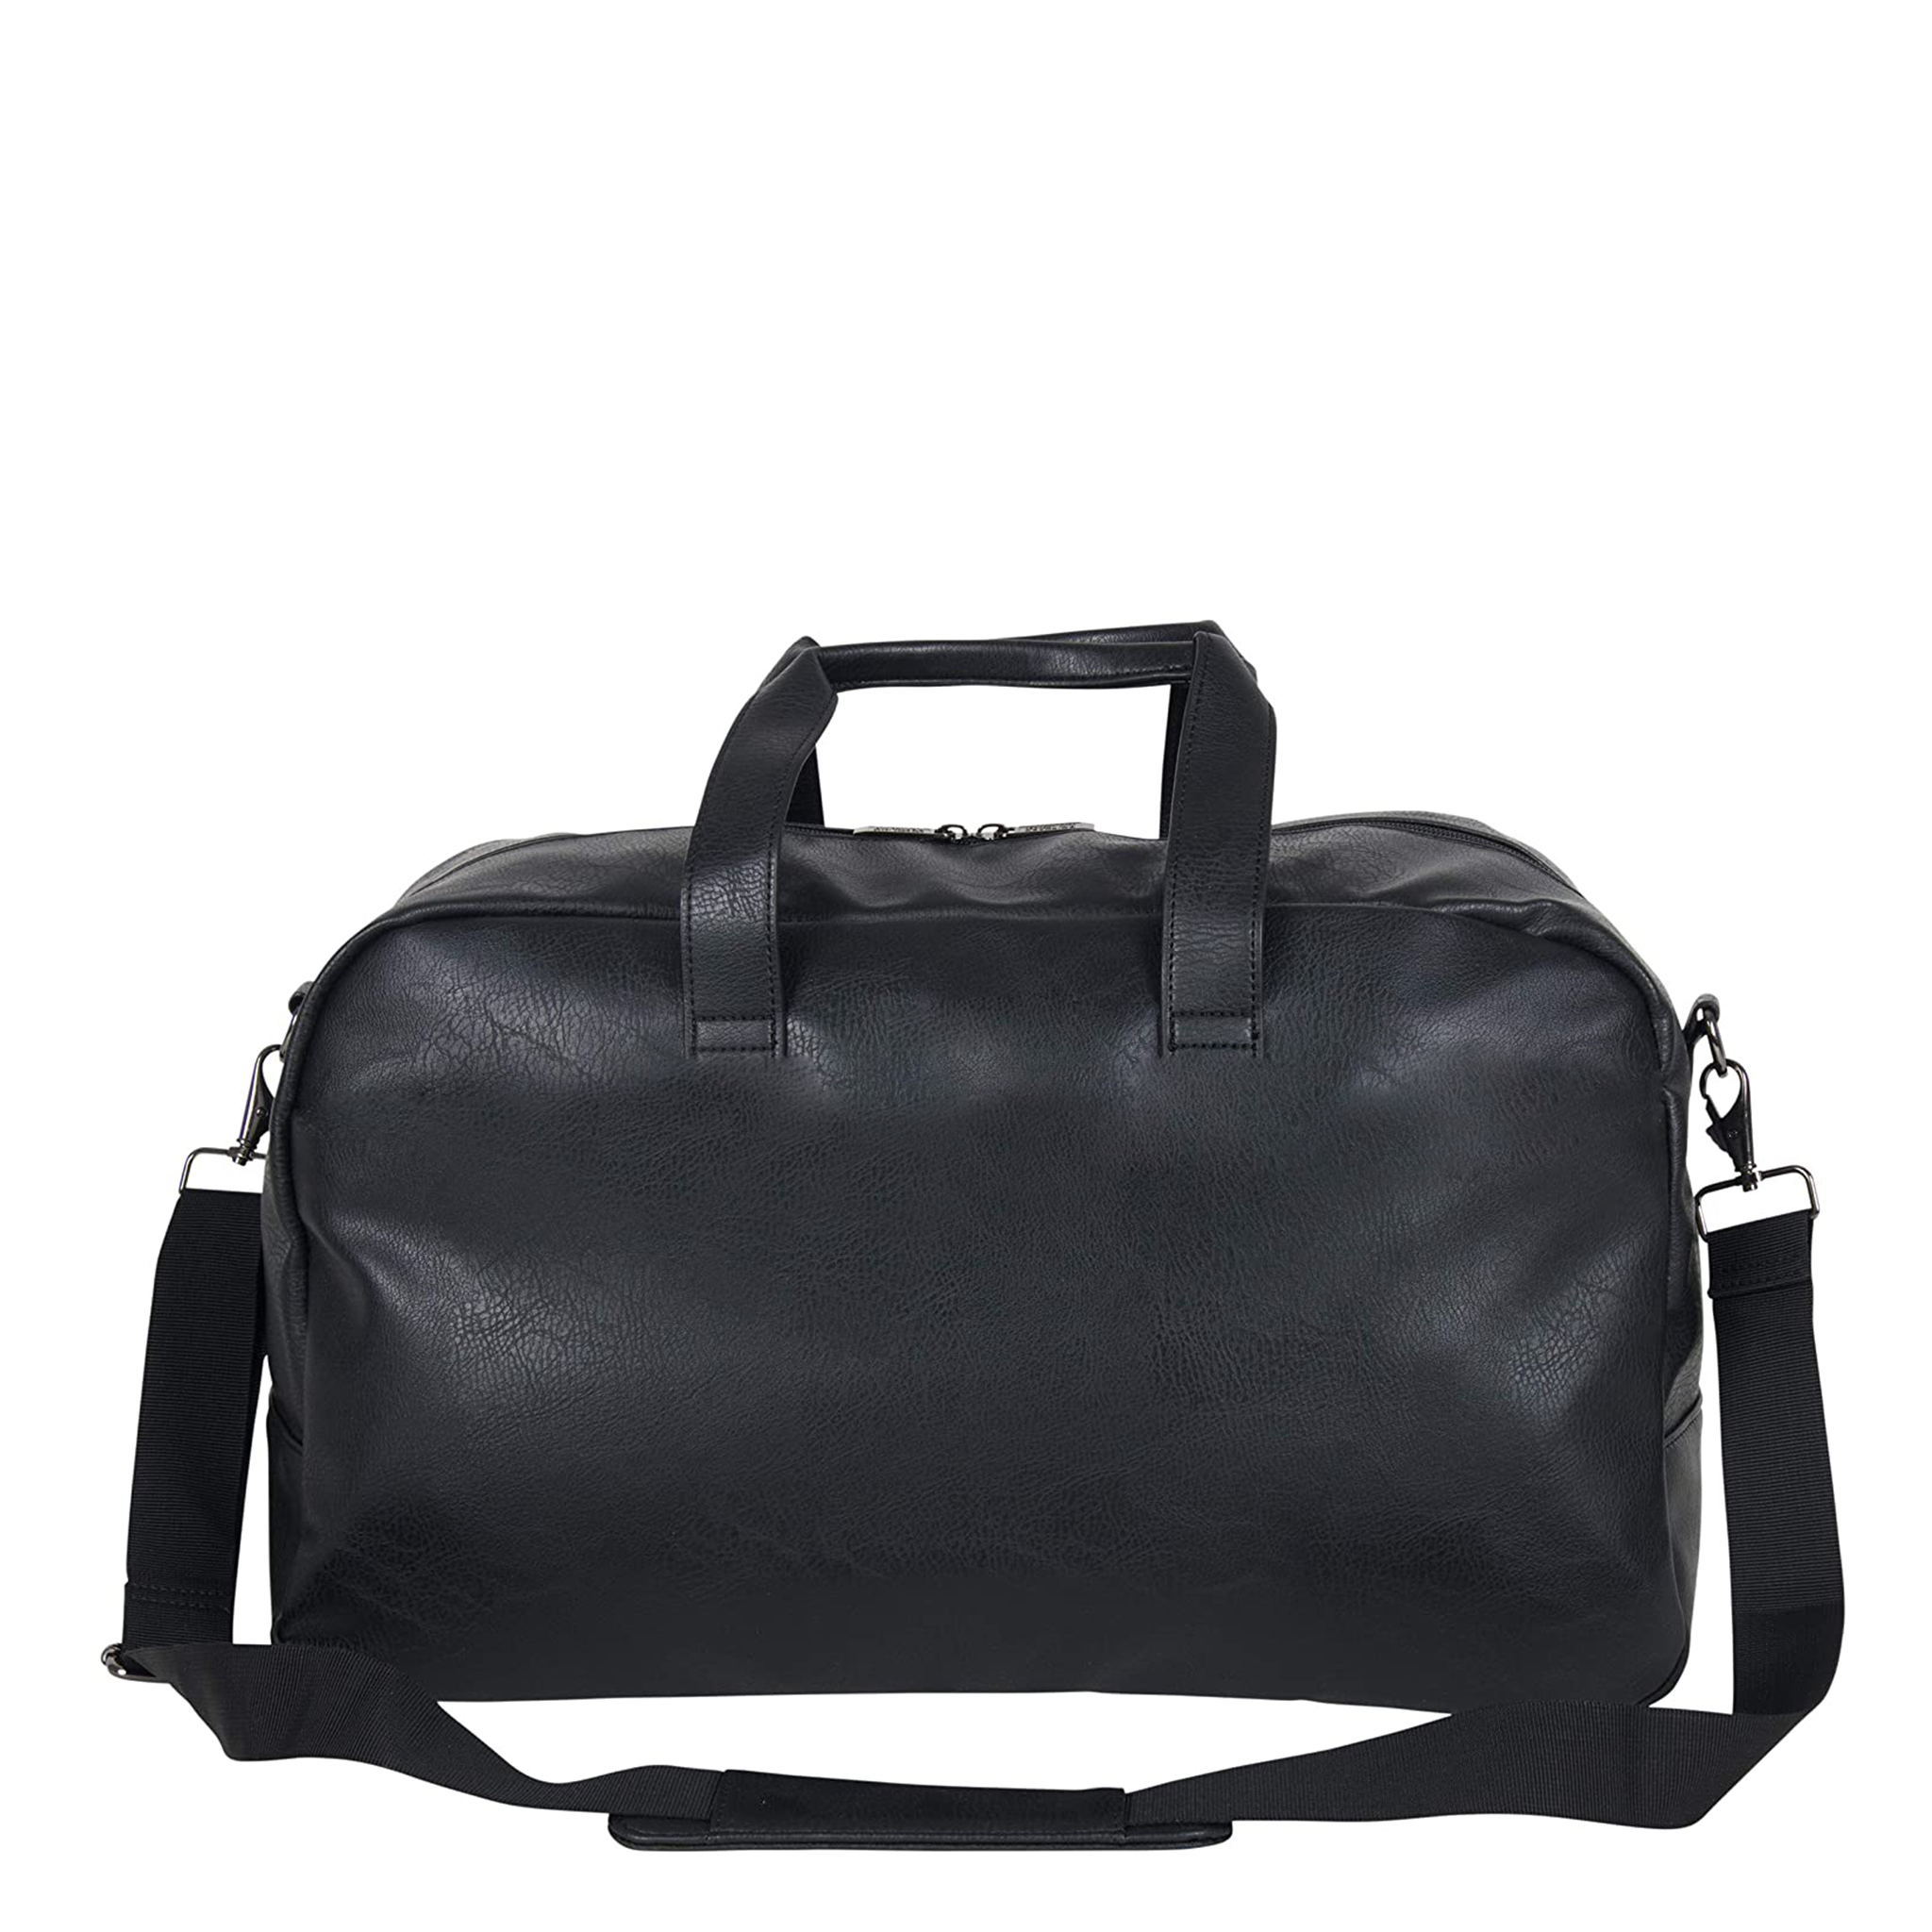 Leatherette Carry-on Duffel Bag (DF15)